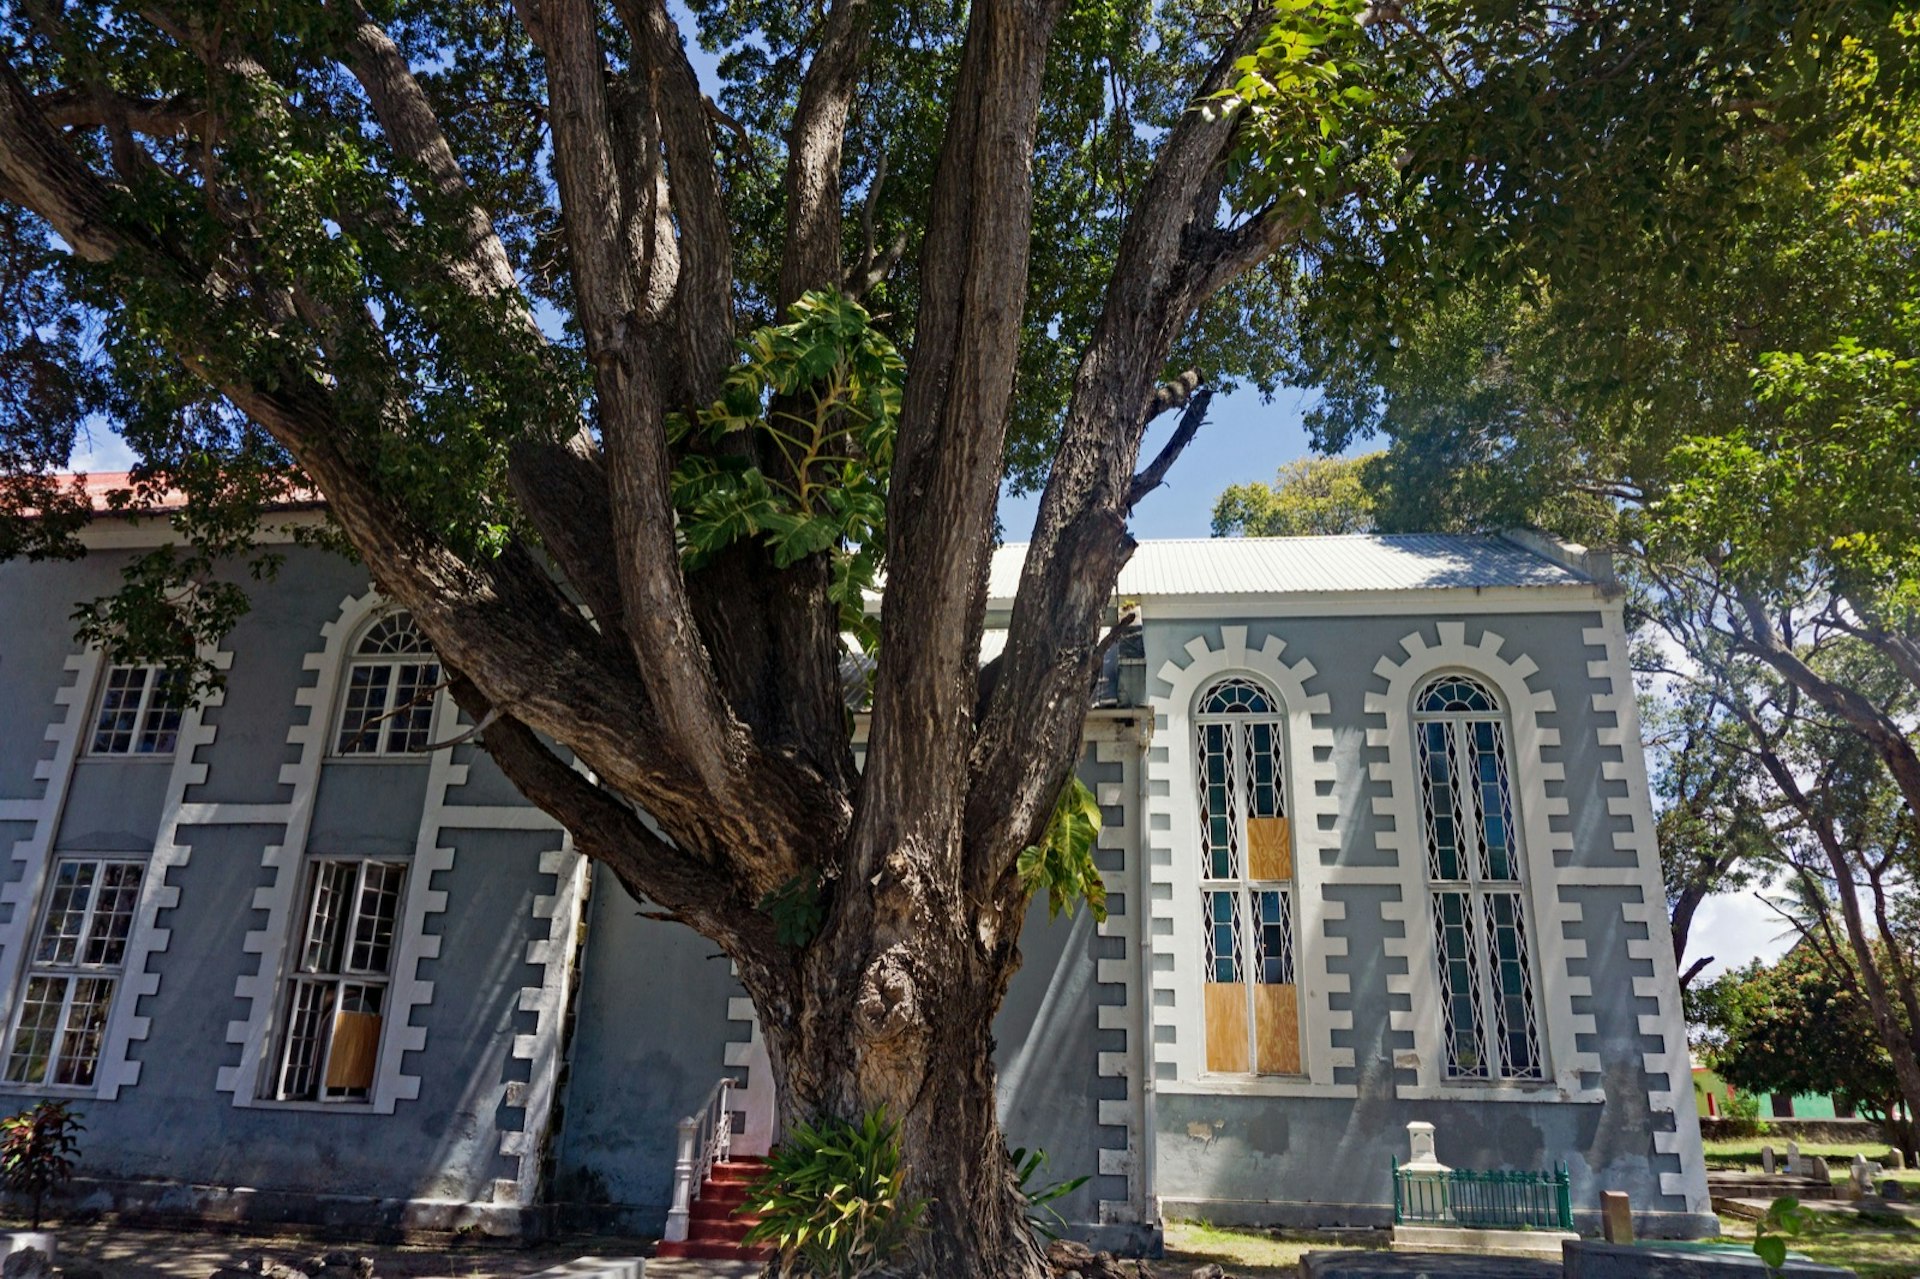 St. Mary's is one of the oldest churches in Bridgetown Lebawit Lily Girma / Lonely Planet